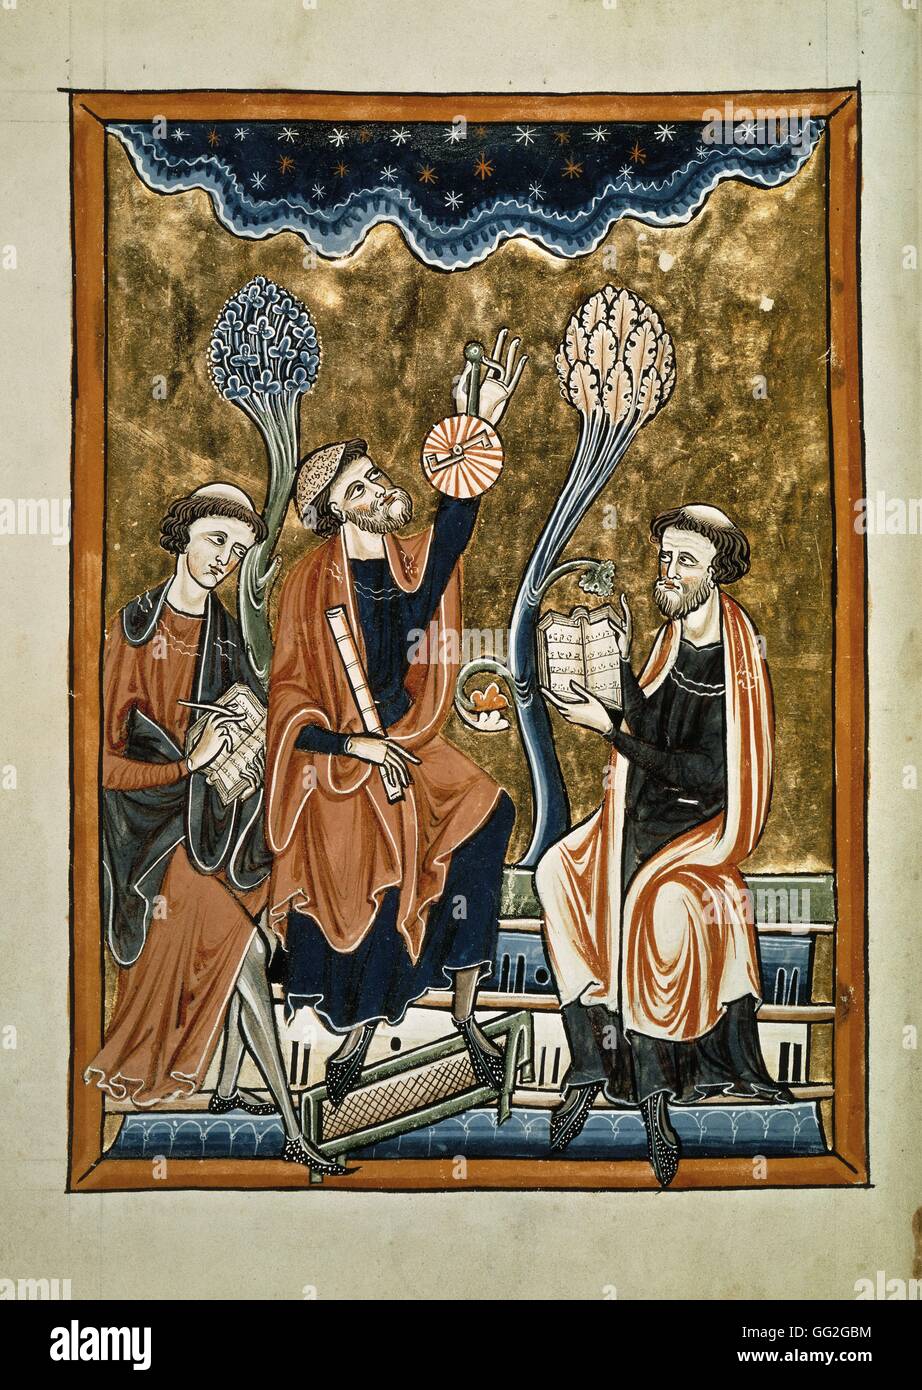 The Astronomer and the Computing clerk Astronomer raising an astrolabe to a starry sky between writing and computing clerks. From the Psalter of Saint Louis and Blanche of Castille. 13th century Illuminated manuscript on parchment Paris, Bibliothèque Nati Stock Photo